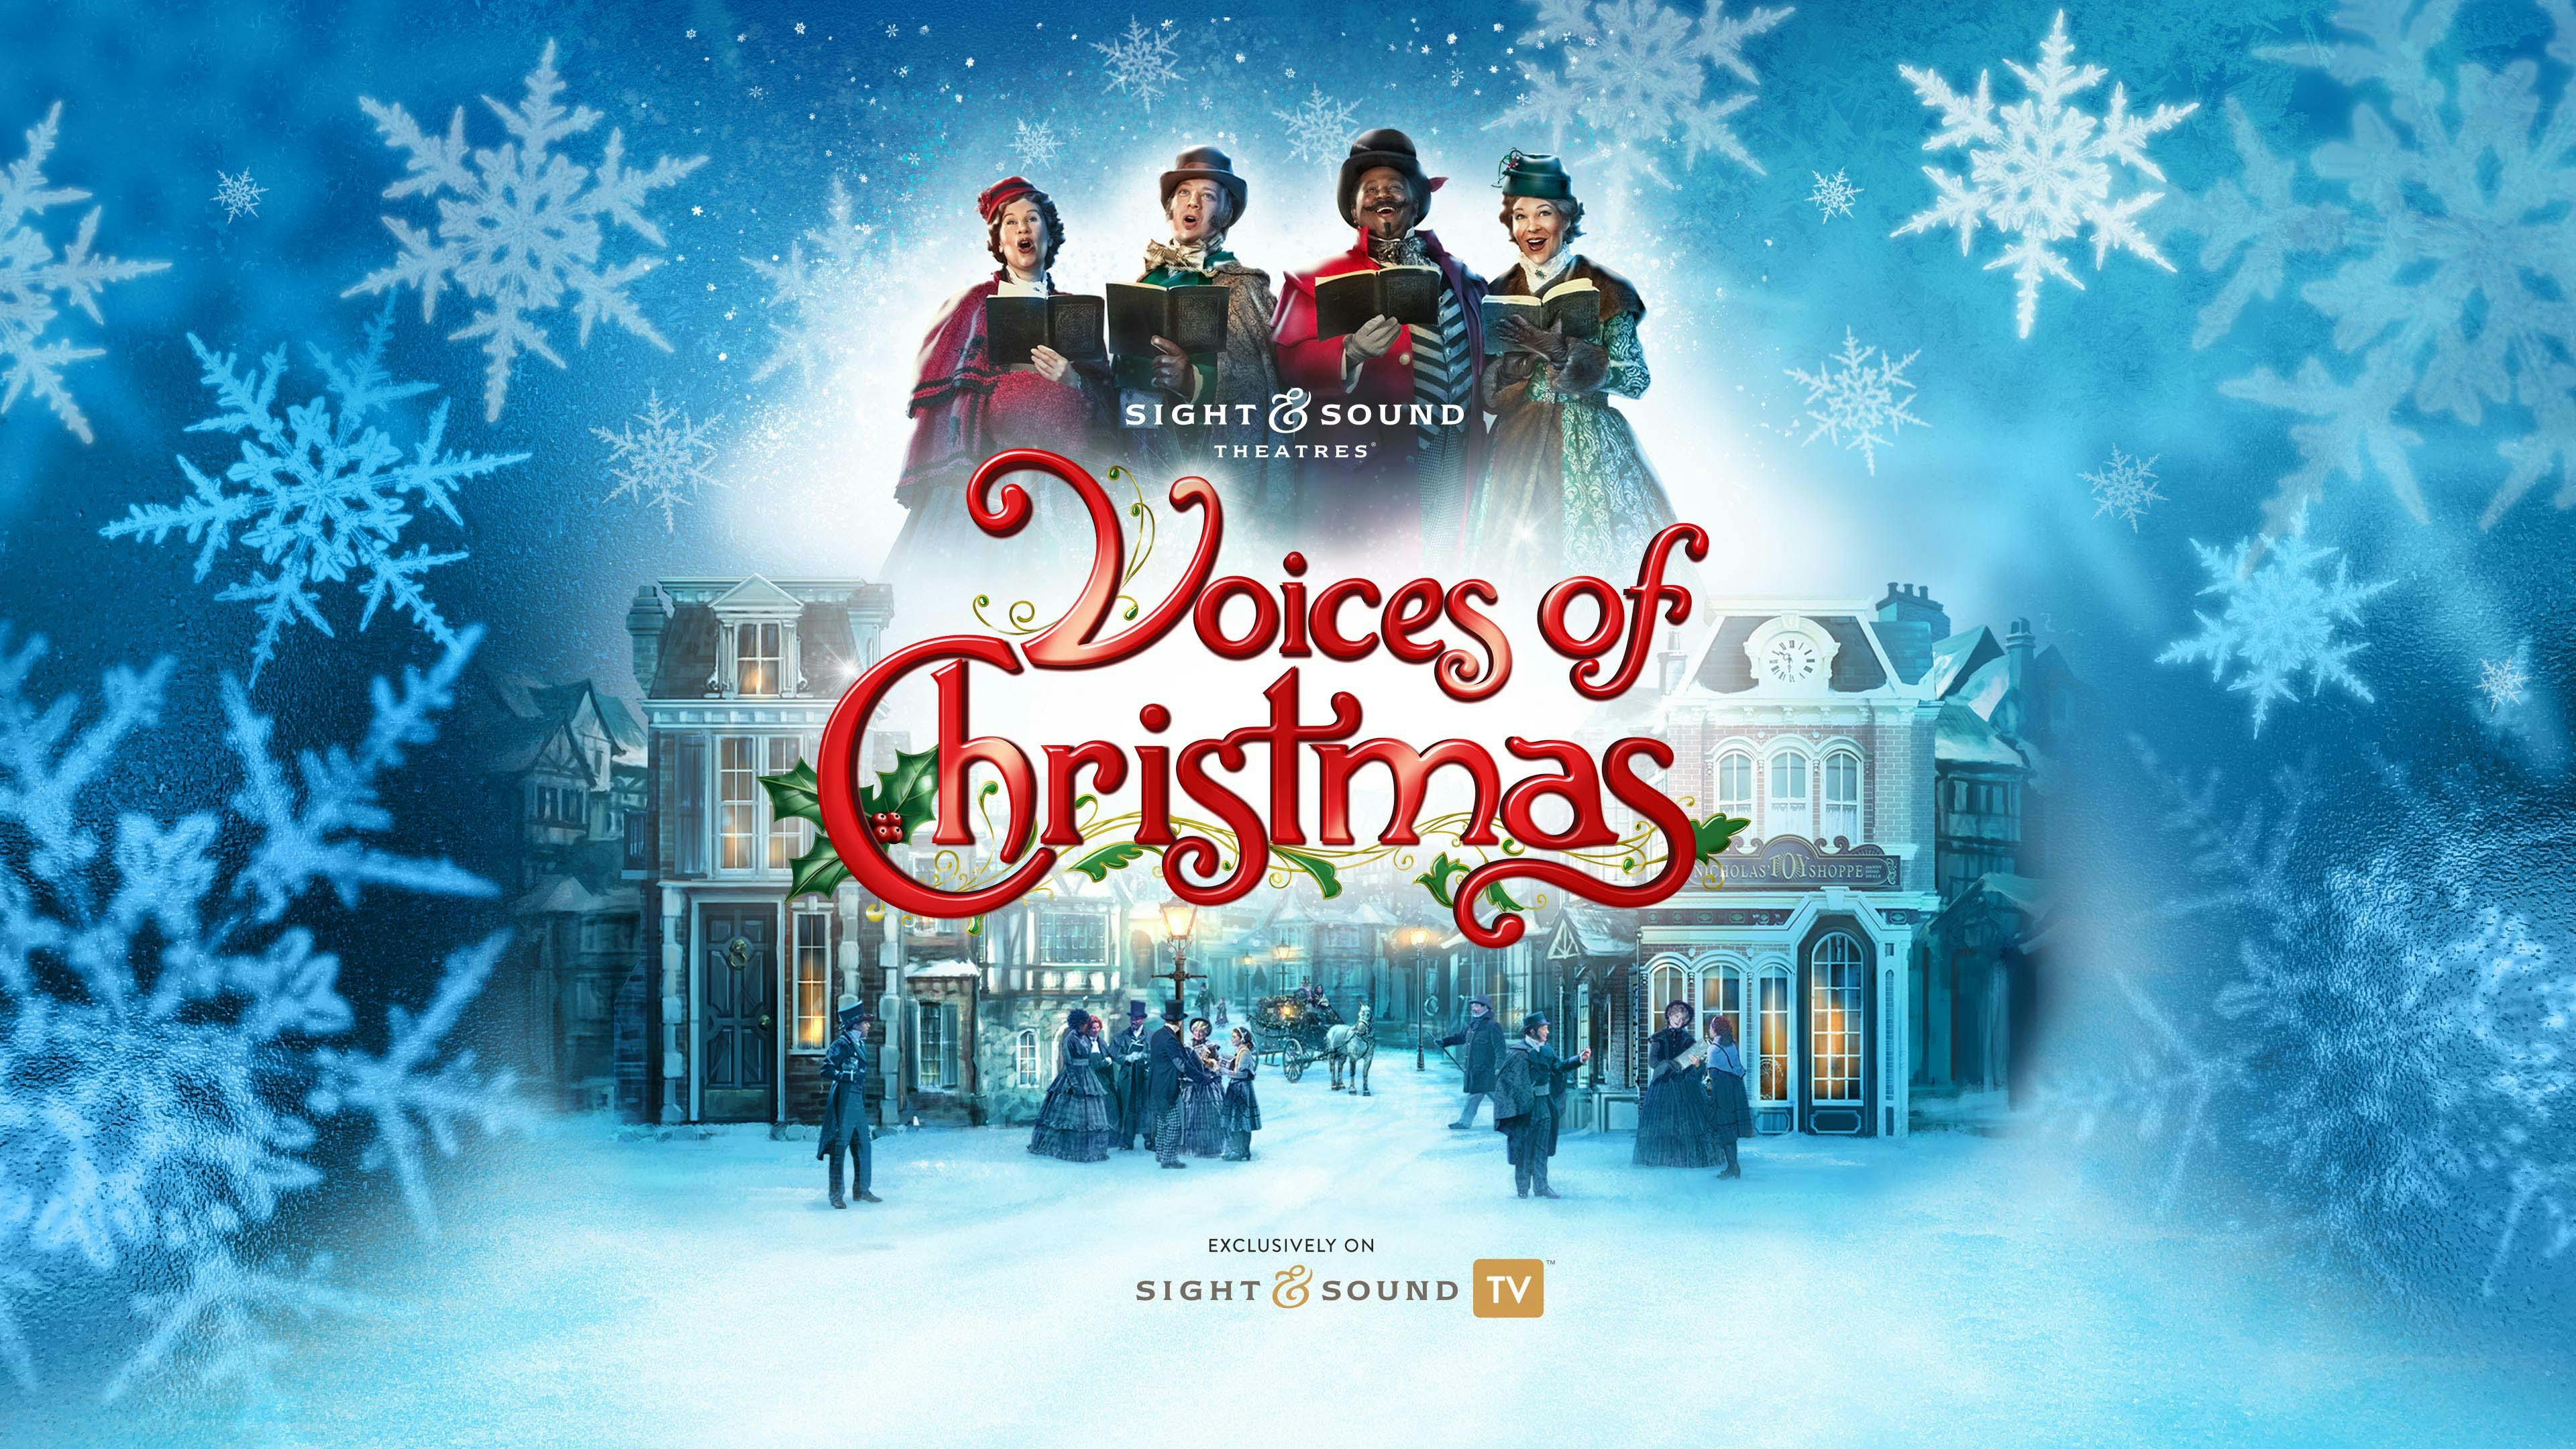 VOICES OF CHRISTMAS  Trailer - Sight & Sound TV